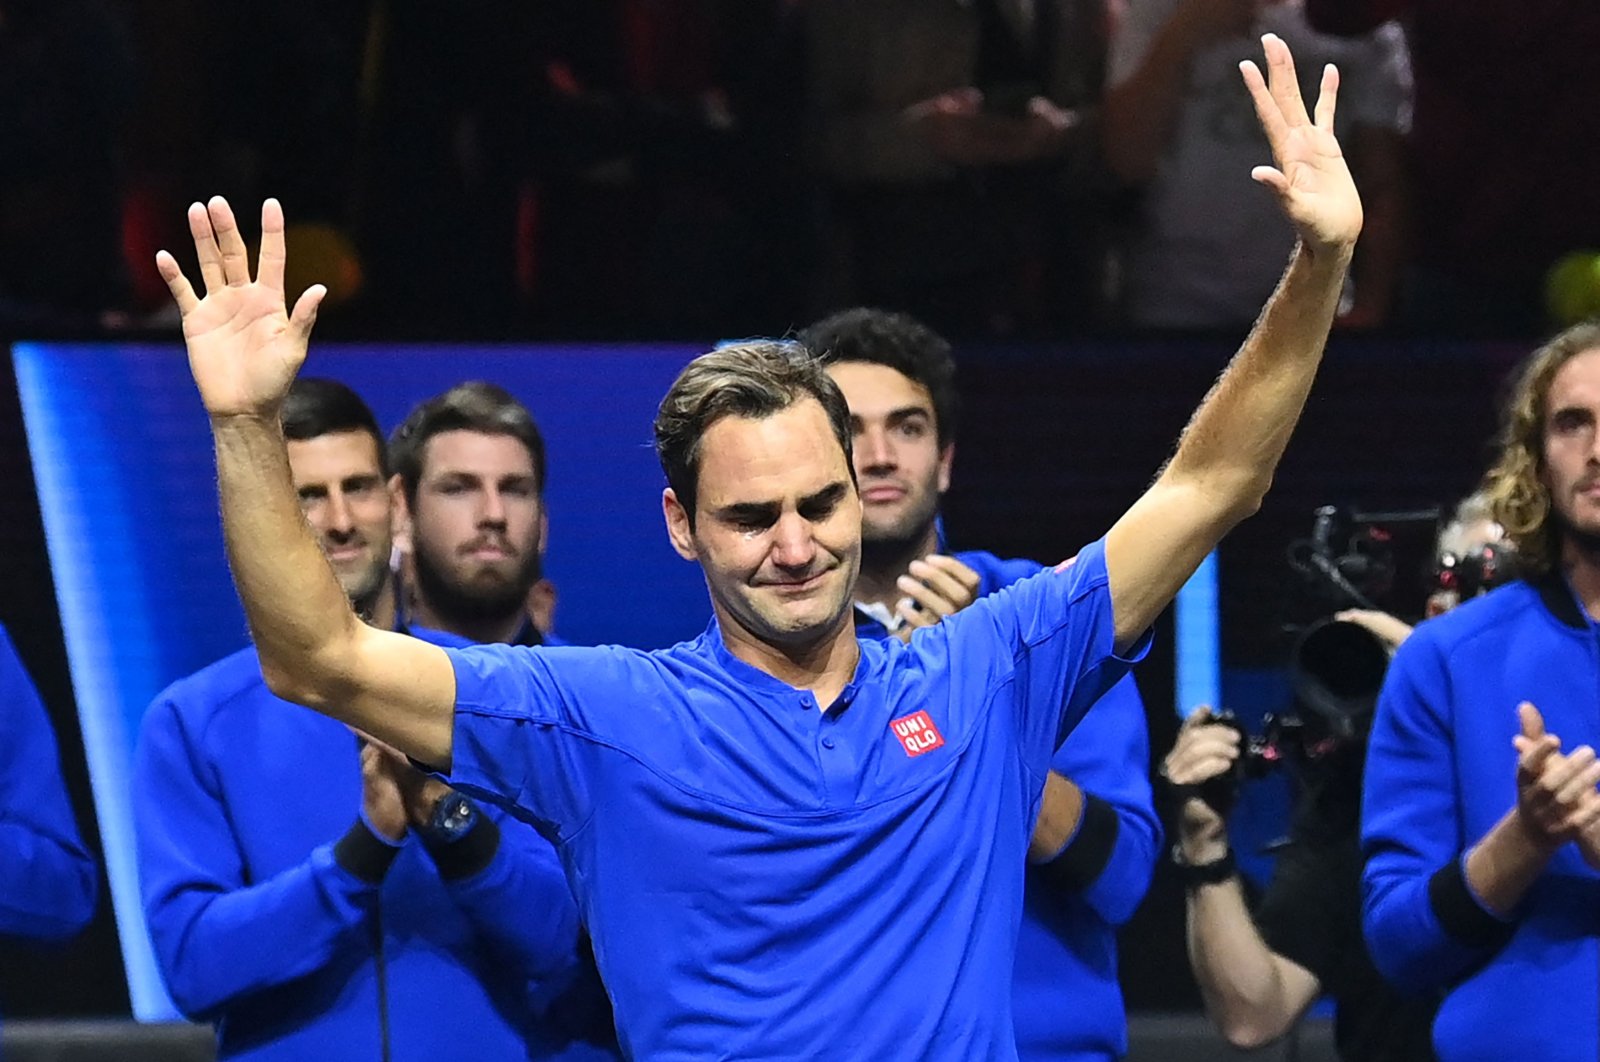 Roger Federer after playing the final in his career at the Laver Cup, London, England, Sept. 24, 2022. (AFP Photo)